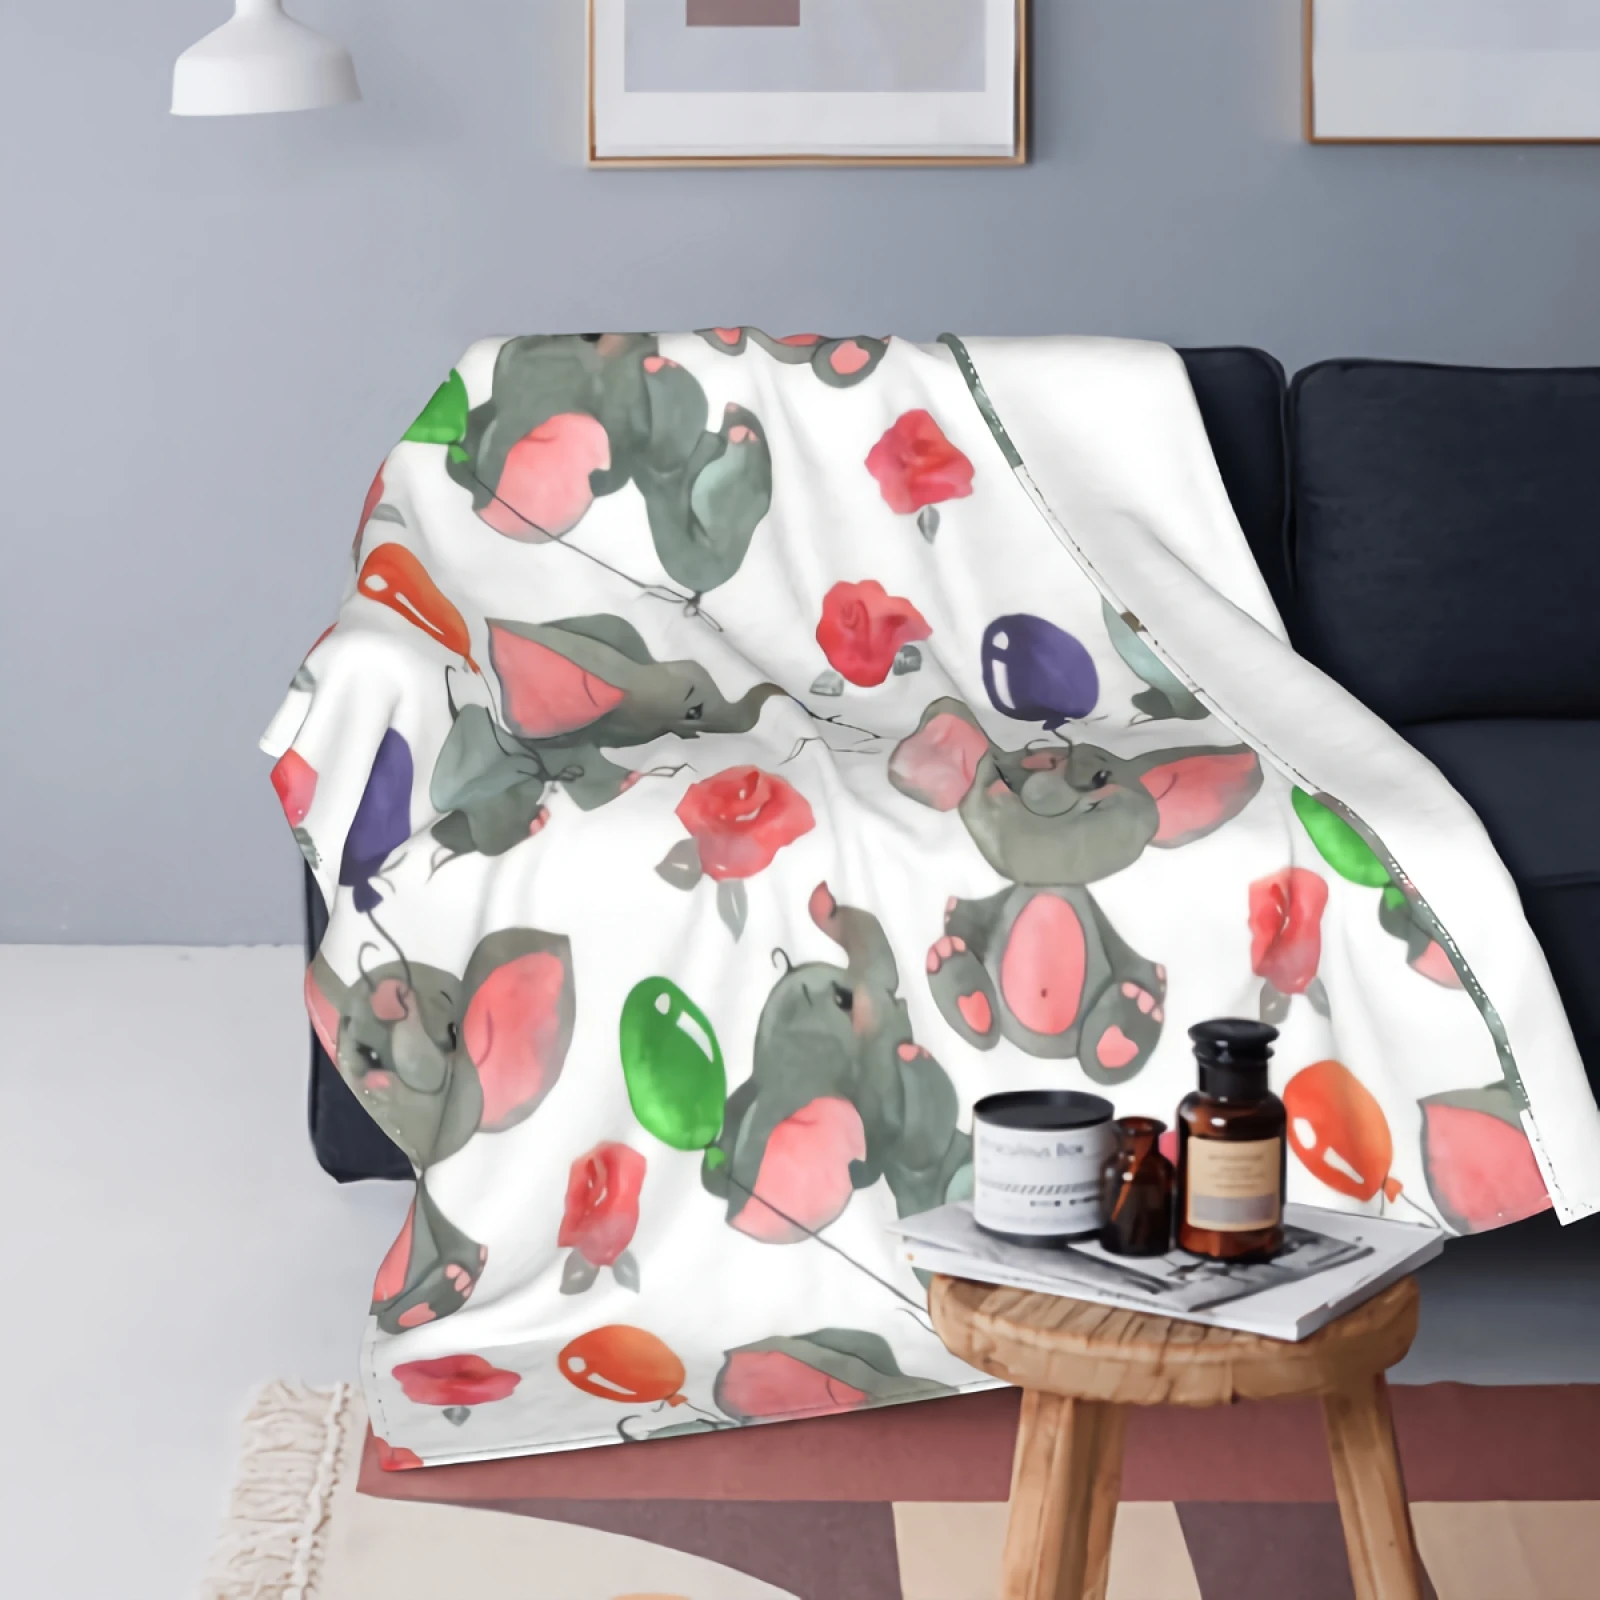 

Watercolor Cute Elephant, Baloons And Roses Flowers Buds Fleece Blanket Throw Size 50"x40" Super Soft Cozy Luxury Bed Blanket